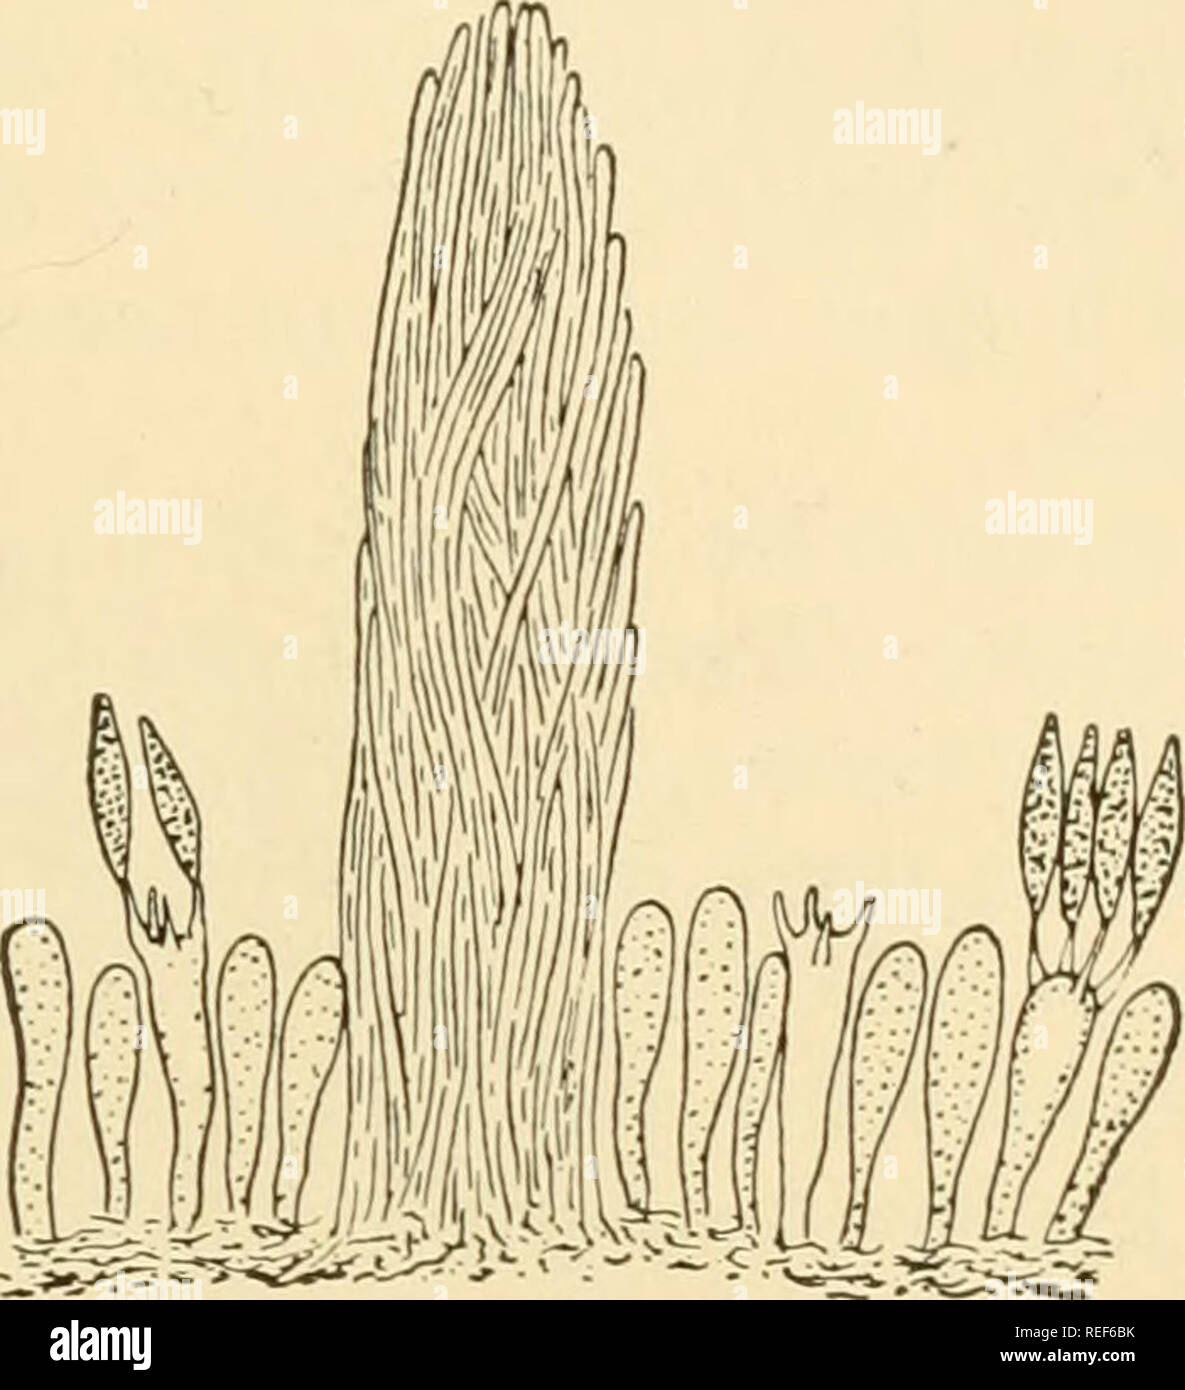 . Comparative morphology of Fungi. Fungi. Fig. 279.—Gloeocystidivm clavuligerum. Fig. 280.—Epithele Typhae. Section of Section of hymenium showing basidia and hymenium showing a peg of hyphae. gloeocystidia. (X 385; after Hoehnel and (X 255; after Hoehnel and Litschaucr, 1906.) Litschauer, 1906.) Coniophora cerebella develops very thick (often 0.5 mm.) crusts, at first fleshy and membranous, later dry and brittle. This species is as important a cause of dry rot of coniferous timber in the United States as Merulius lacrymans in Europe. Corticium centrijugum, C. Stevensii and C. radiosum (C. alu Stock Photo